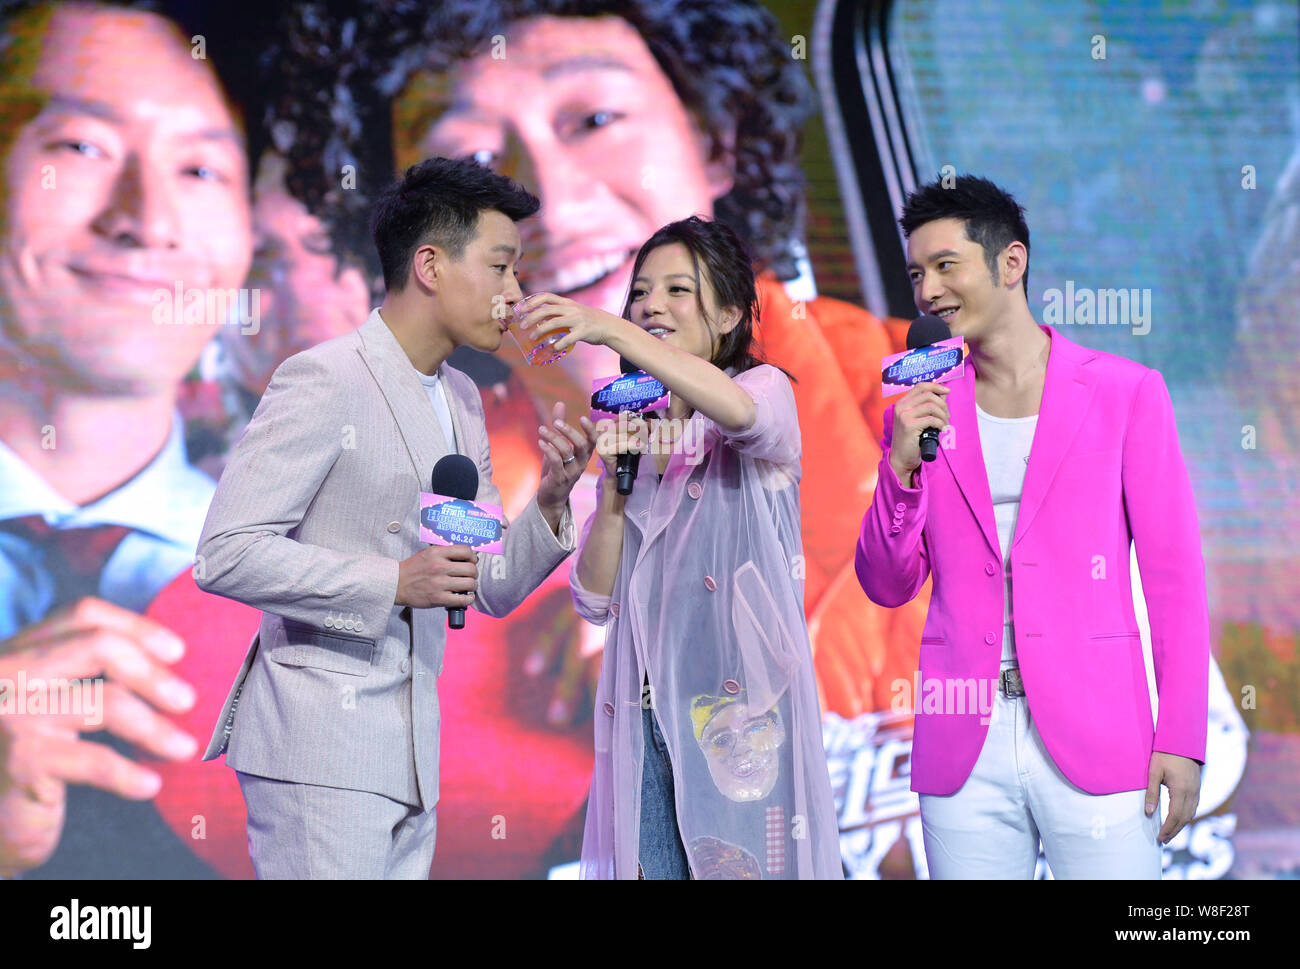 Chinese actress Vicki Zhao Wei, center, feeds actor Tong Dawei, left, juice next to actor Huang Xiaoming during the premiere of their new movie 'Holly Stock Photo